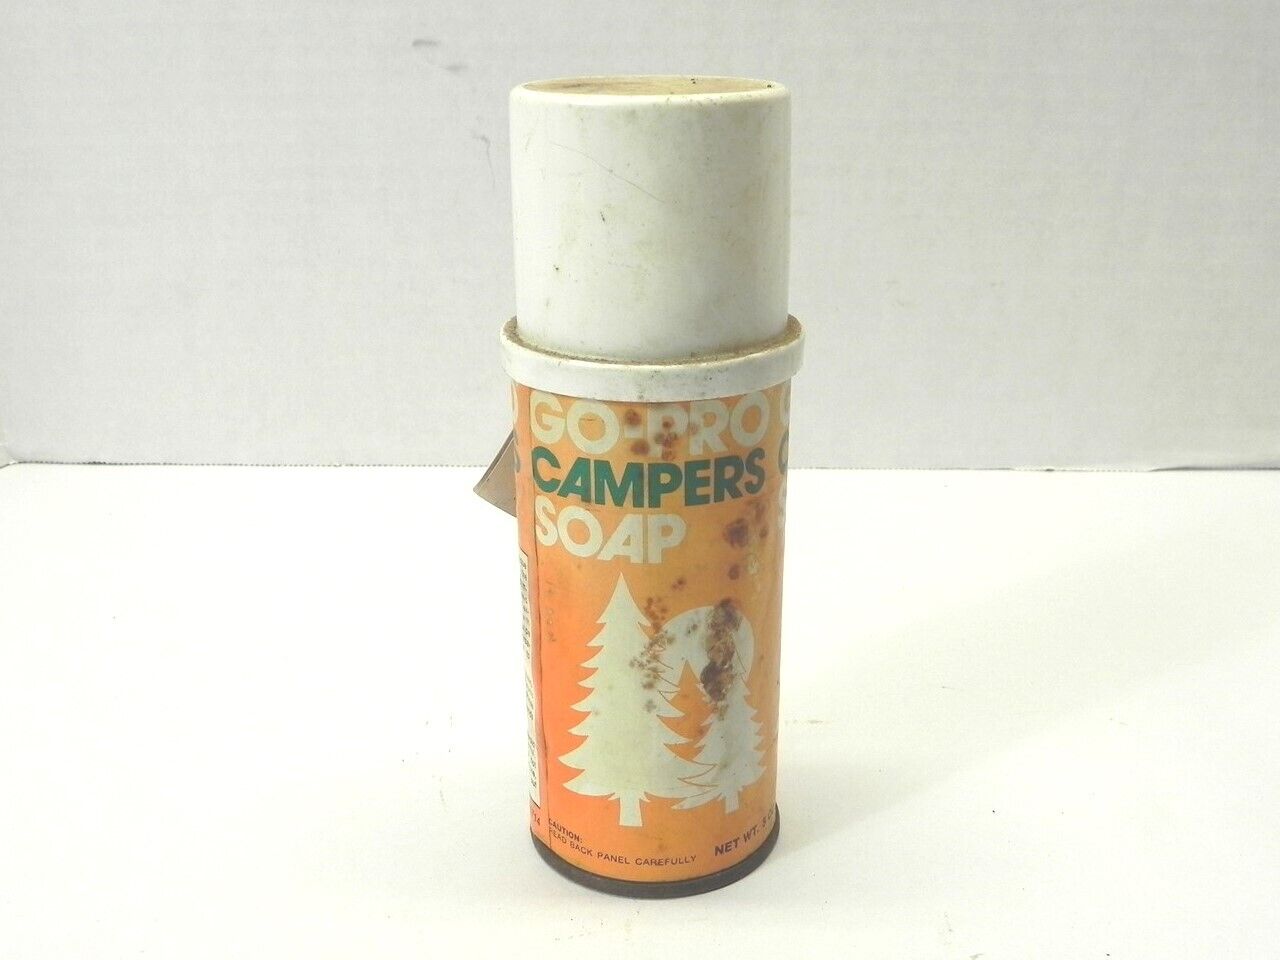 VINTAGE GO-PRO CAMP SOAP AEROSOL CAN 5 OZ FOR DISPLAY CONTAINS SOME CONTENTS 